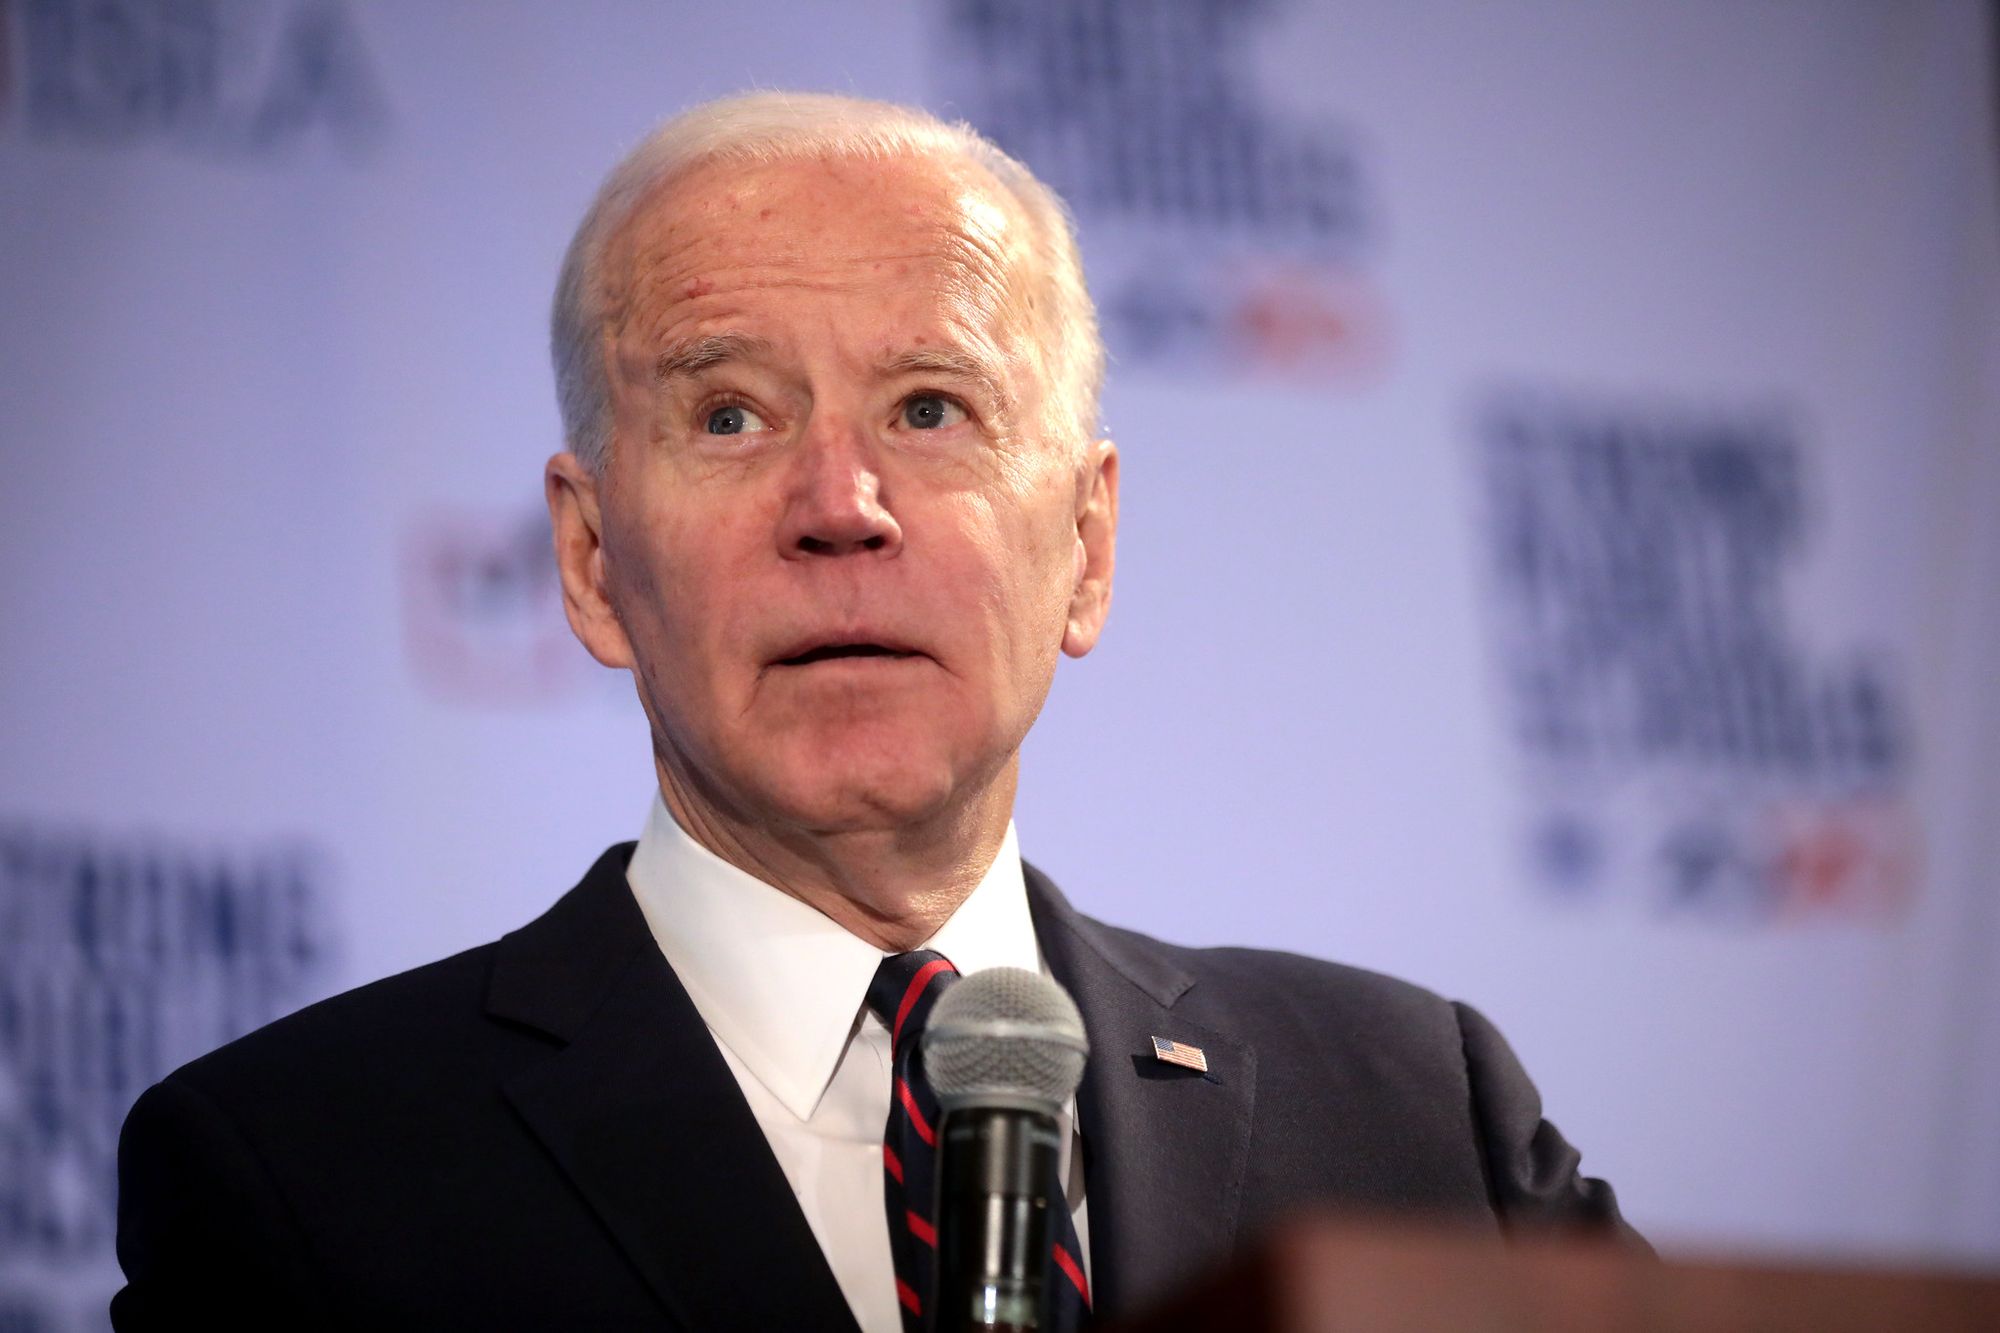 Joe Biden speaking with attendees at the 2020 Iowa State Education Association (ISEA) Legislative Conference at the Sheraton West Des Moines Hotel in West Des Moines, Iowa. Photo: Gage Skidmore